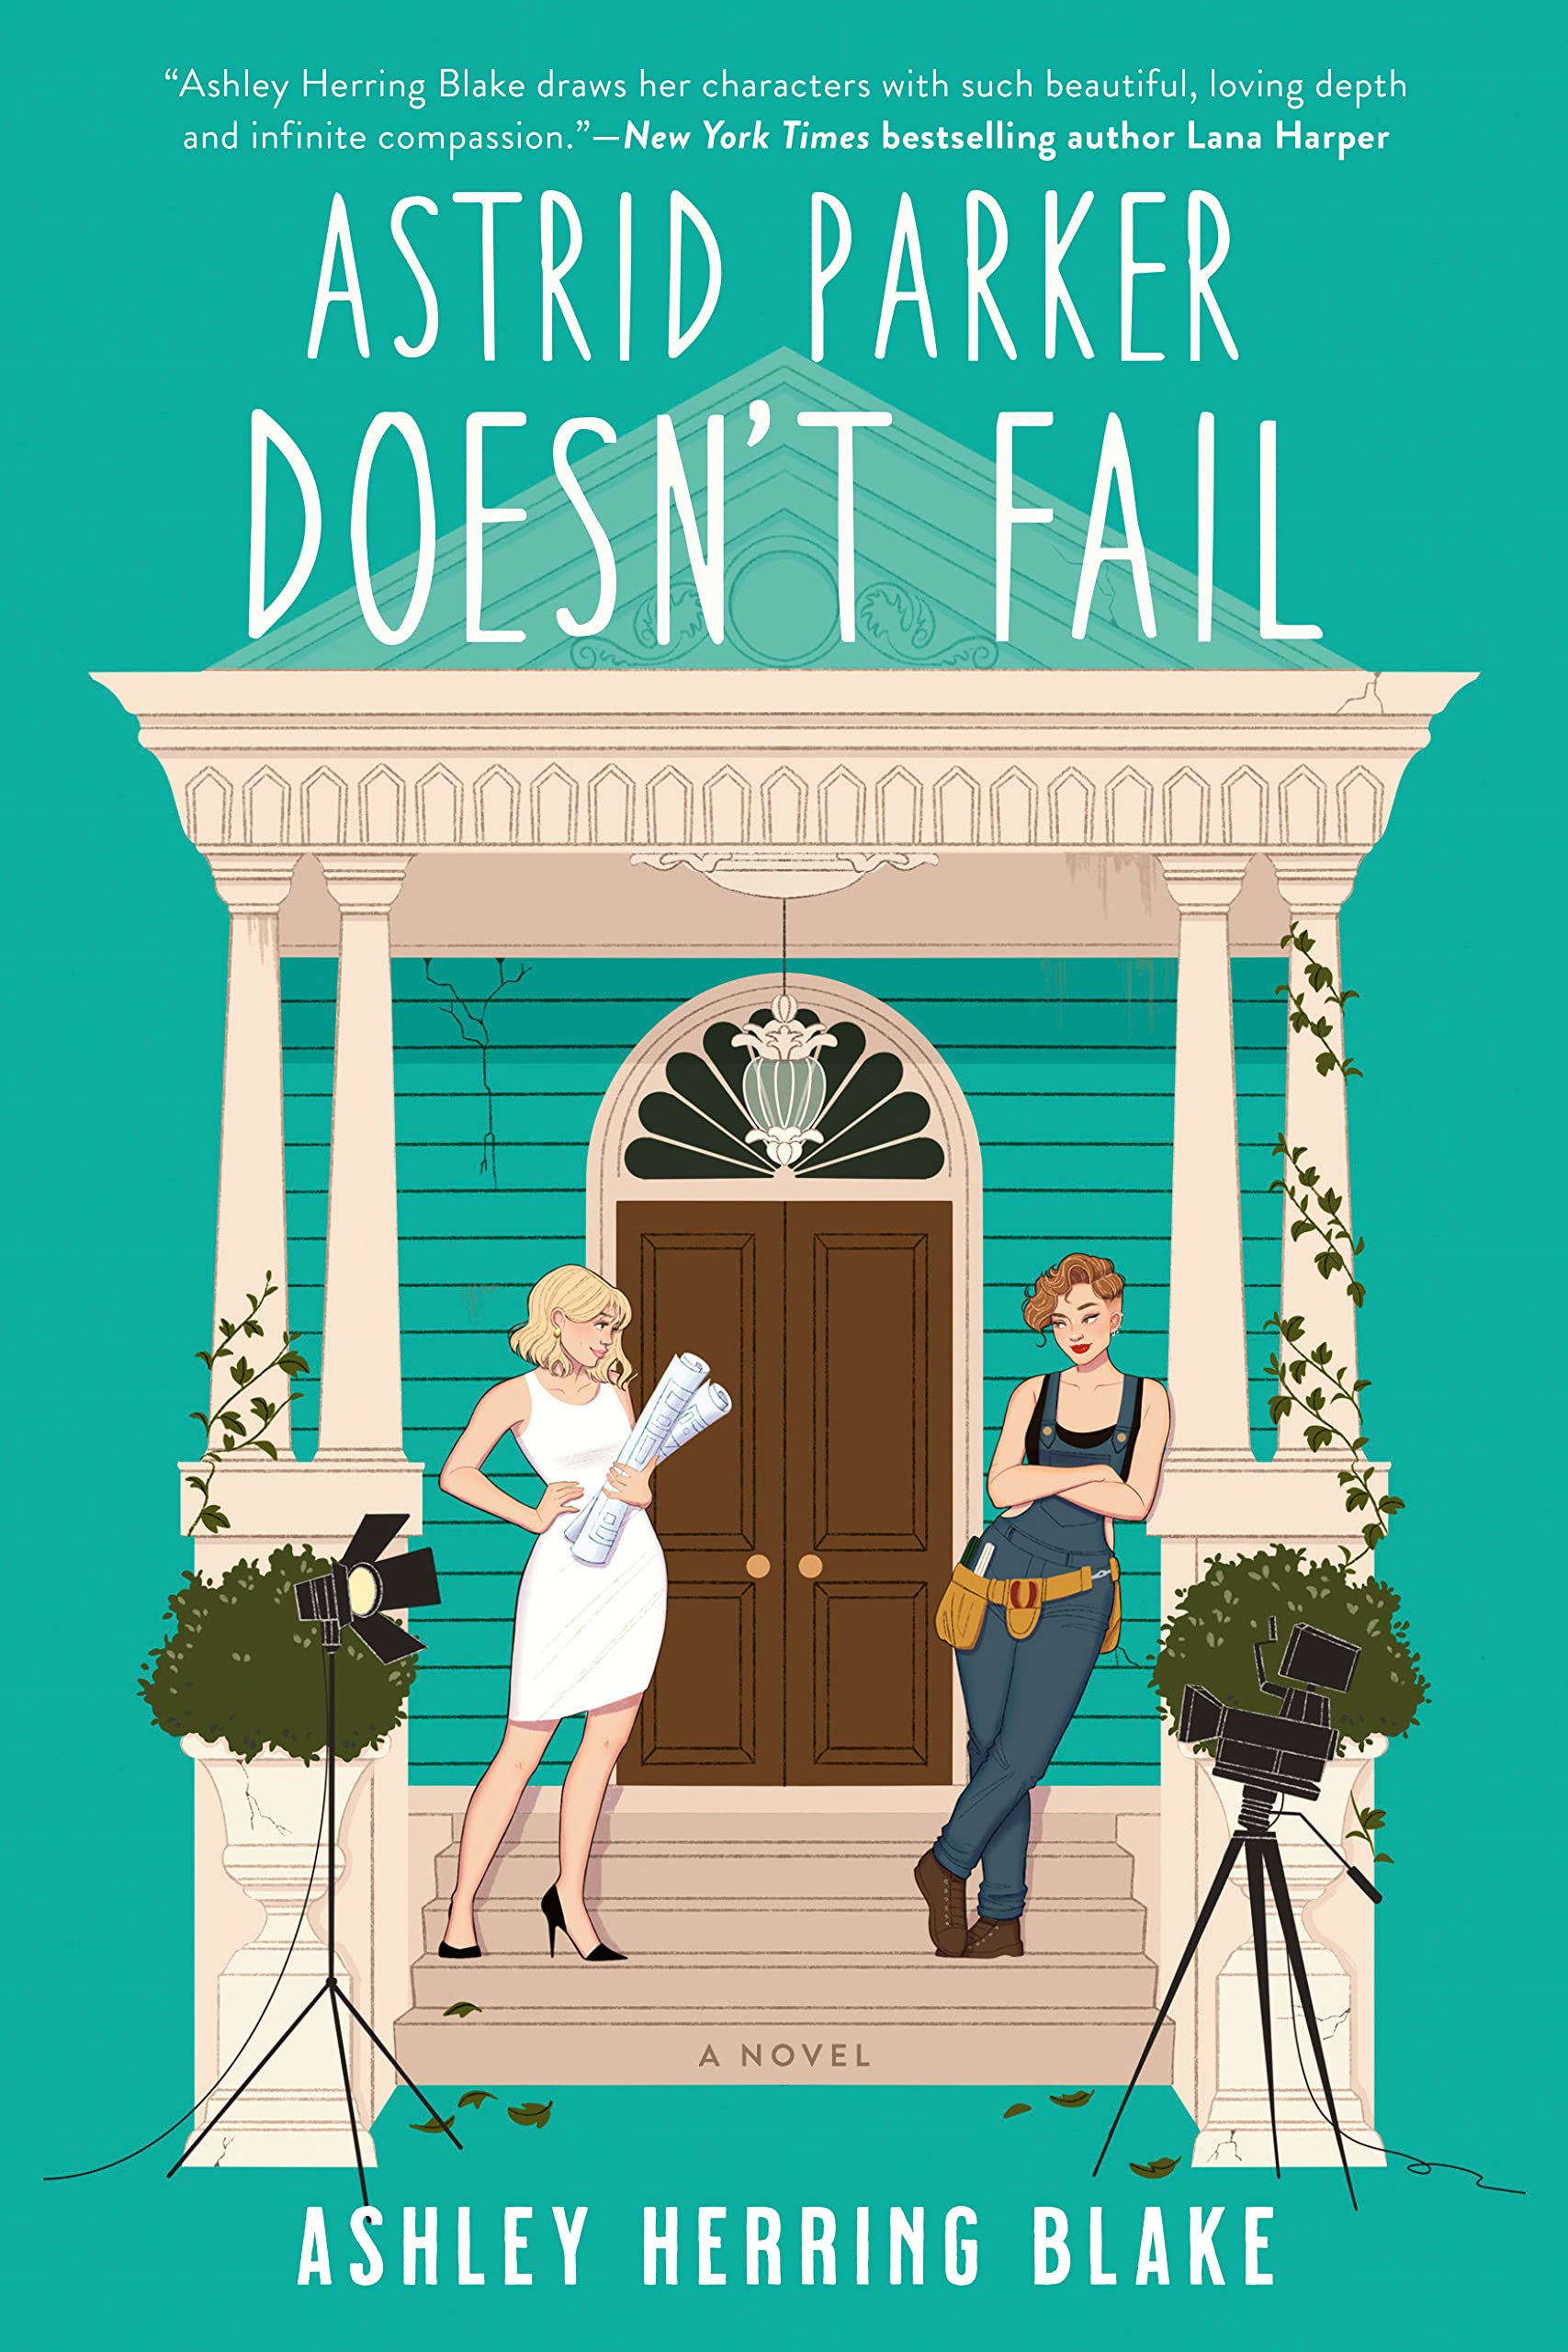 Image for "Astrid Parker Doesnt Fail"